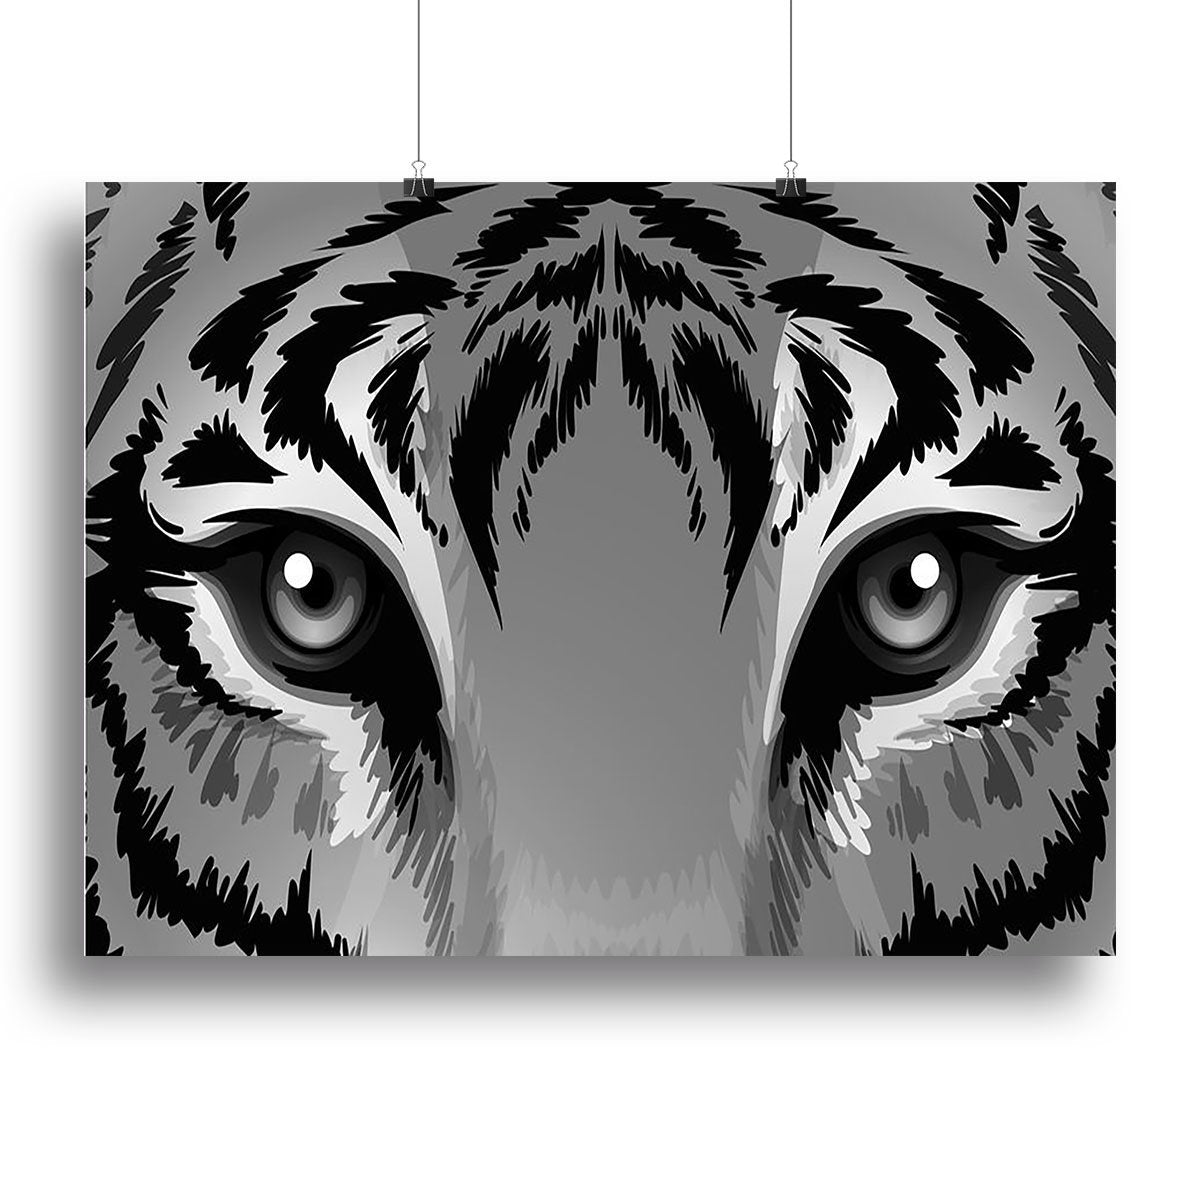 Illustration of a tiger with sharp eyes Canvas Print or Poster